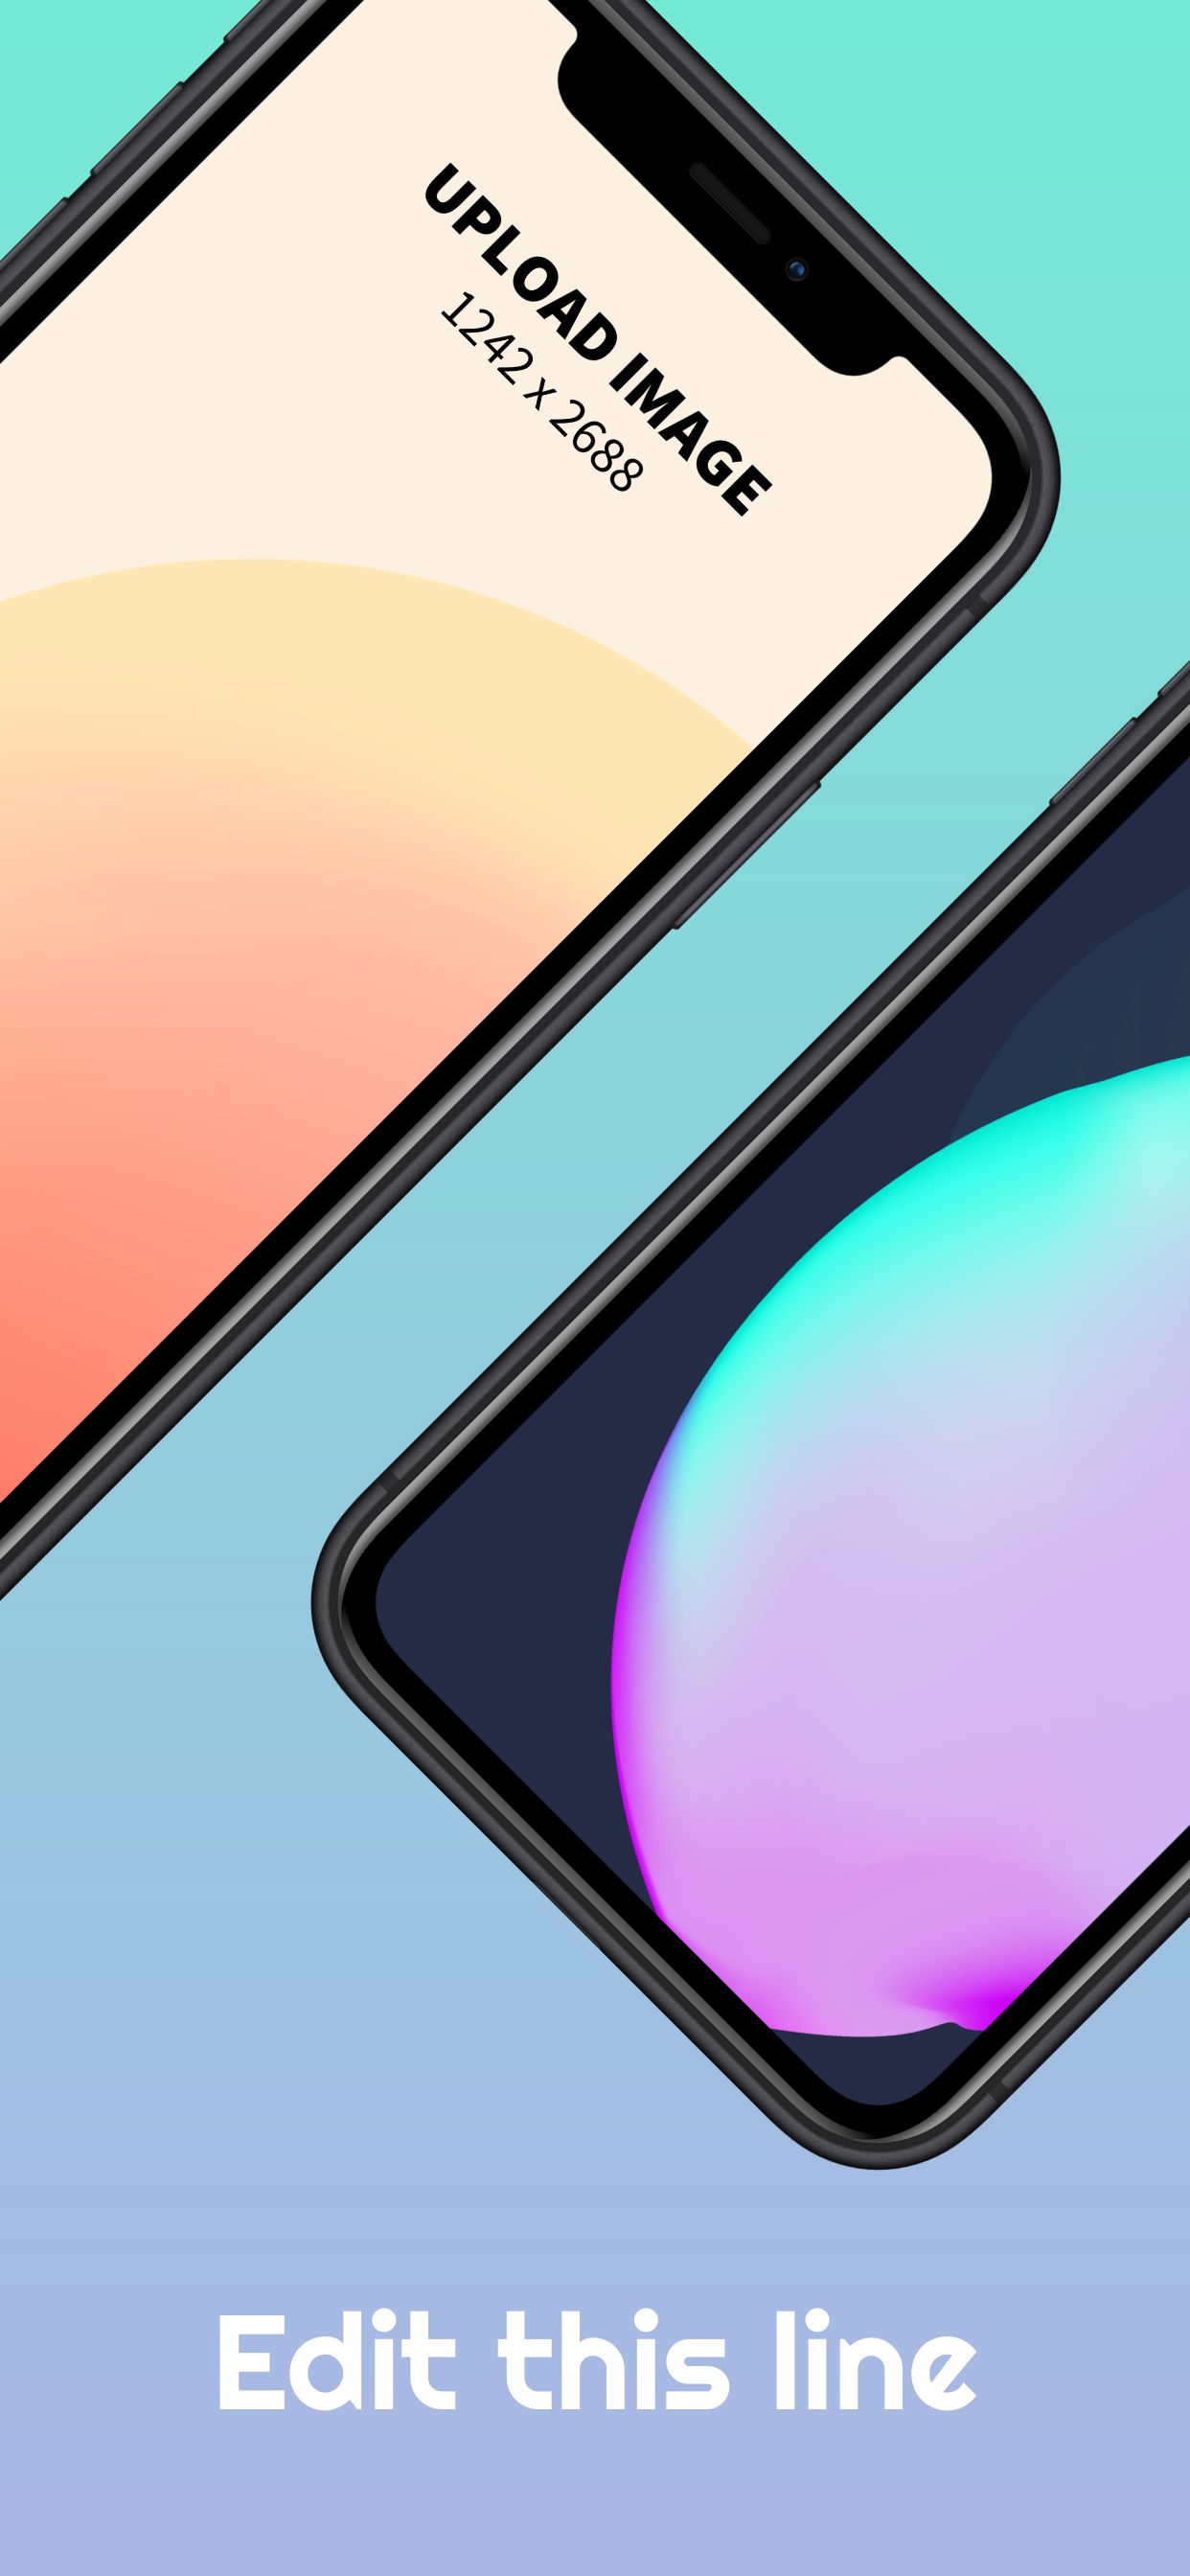 iPhone XS Max Screenshot 10 template. Quickly edit text, colors, images, and more for free.